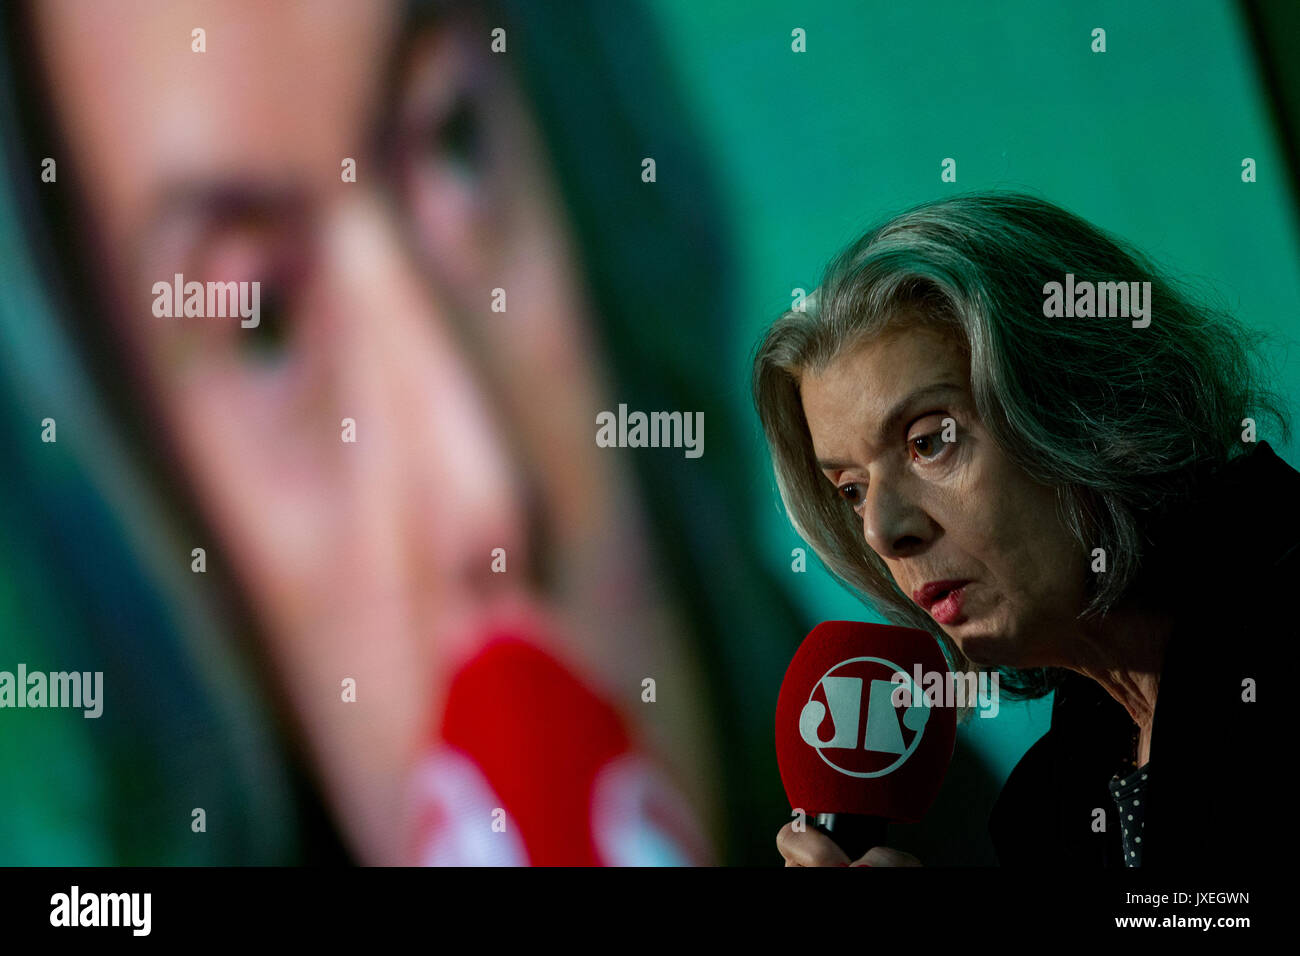 Sao Paulo, Sao Paulo, Brazil. 15th Aug, 2017. CARMEM LUCIA, President of the Federal Supreme Court attends a meeting with lawyers and jurists to discuss the Brazilian justice system, in Sao Paulo, Brazil. Credit: Paulo Lopes/ZUMA Wire/Alamy Live News Stock Photo